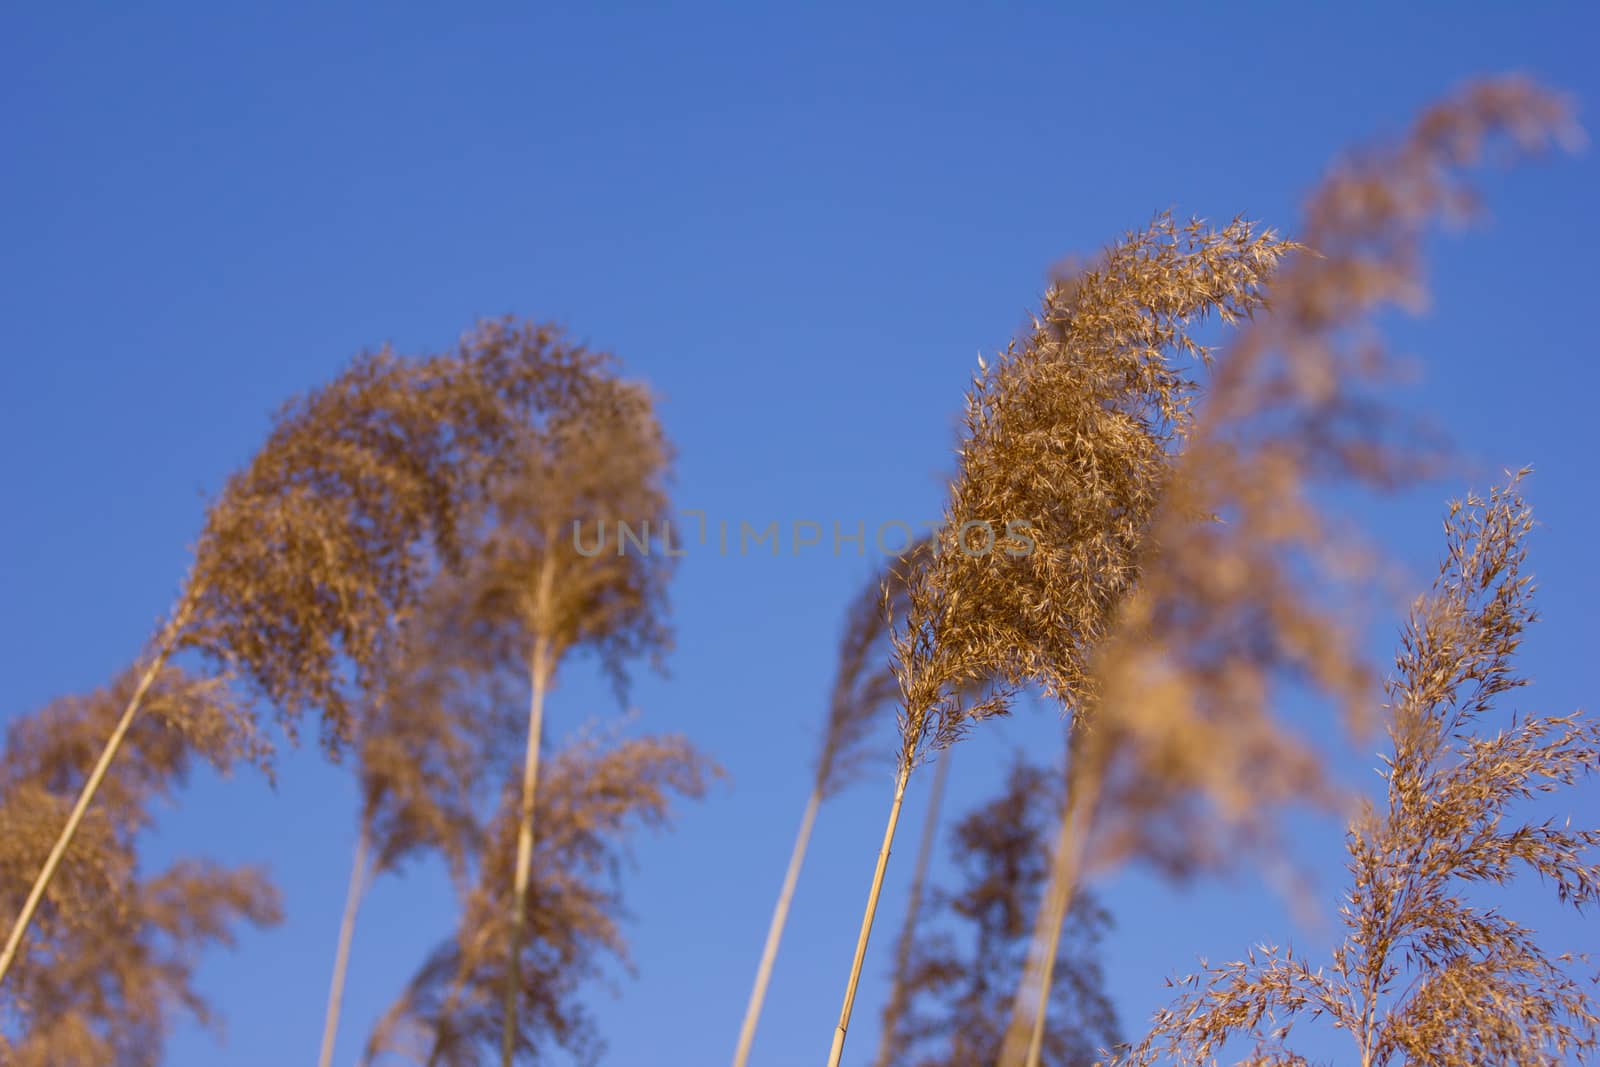 Common reeds on windy day